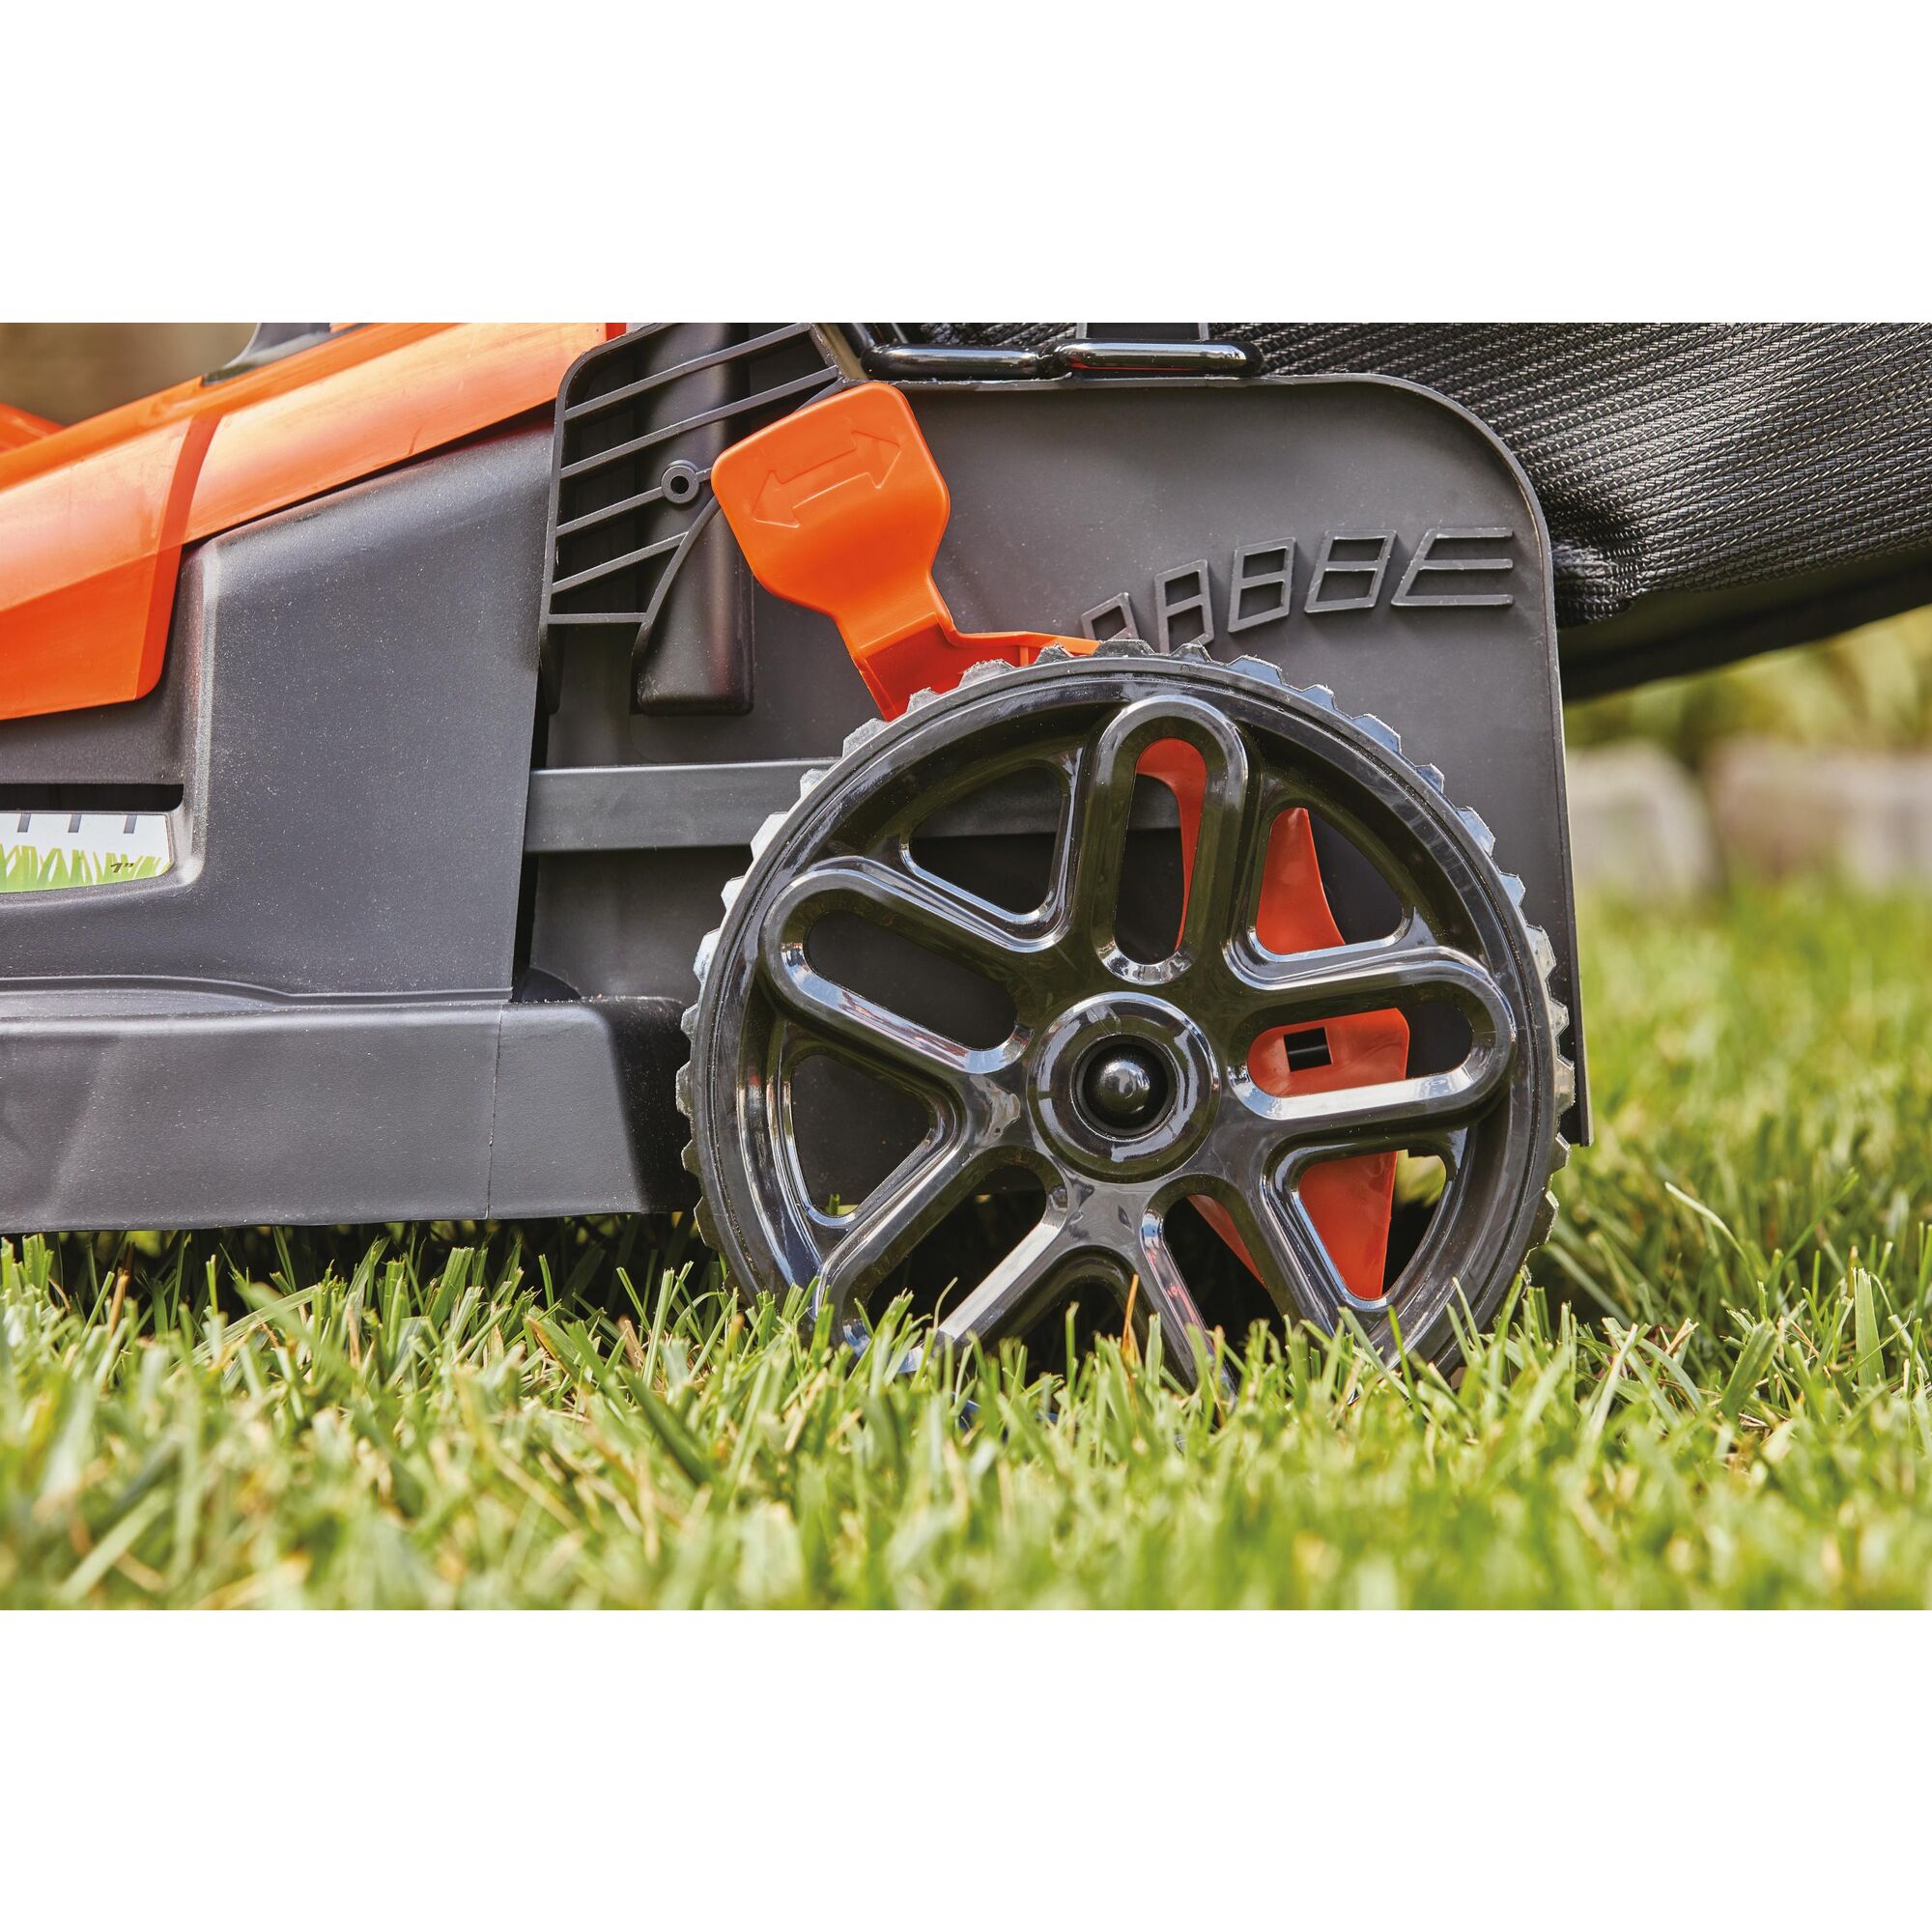 12 Amp 17 inch Electric Lawn Mower with Rugged wheel treads feature.